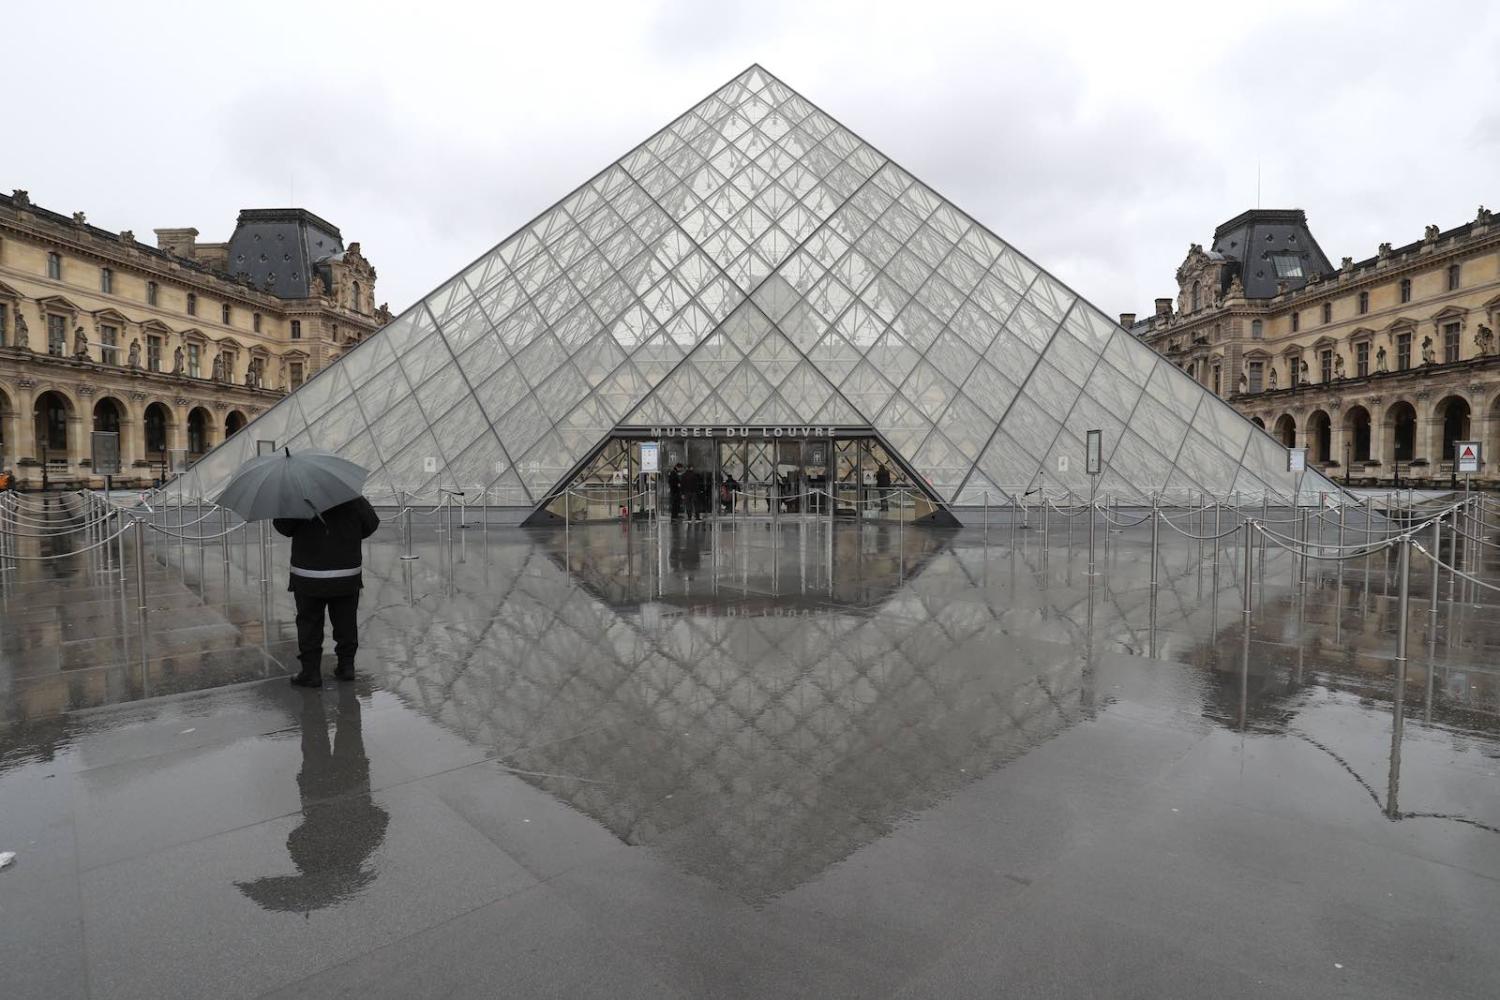 The deserted courtyard outside the Louvre Pyramid, 2 March (Ludovic Marin/AFP/Getty Images)